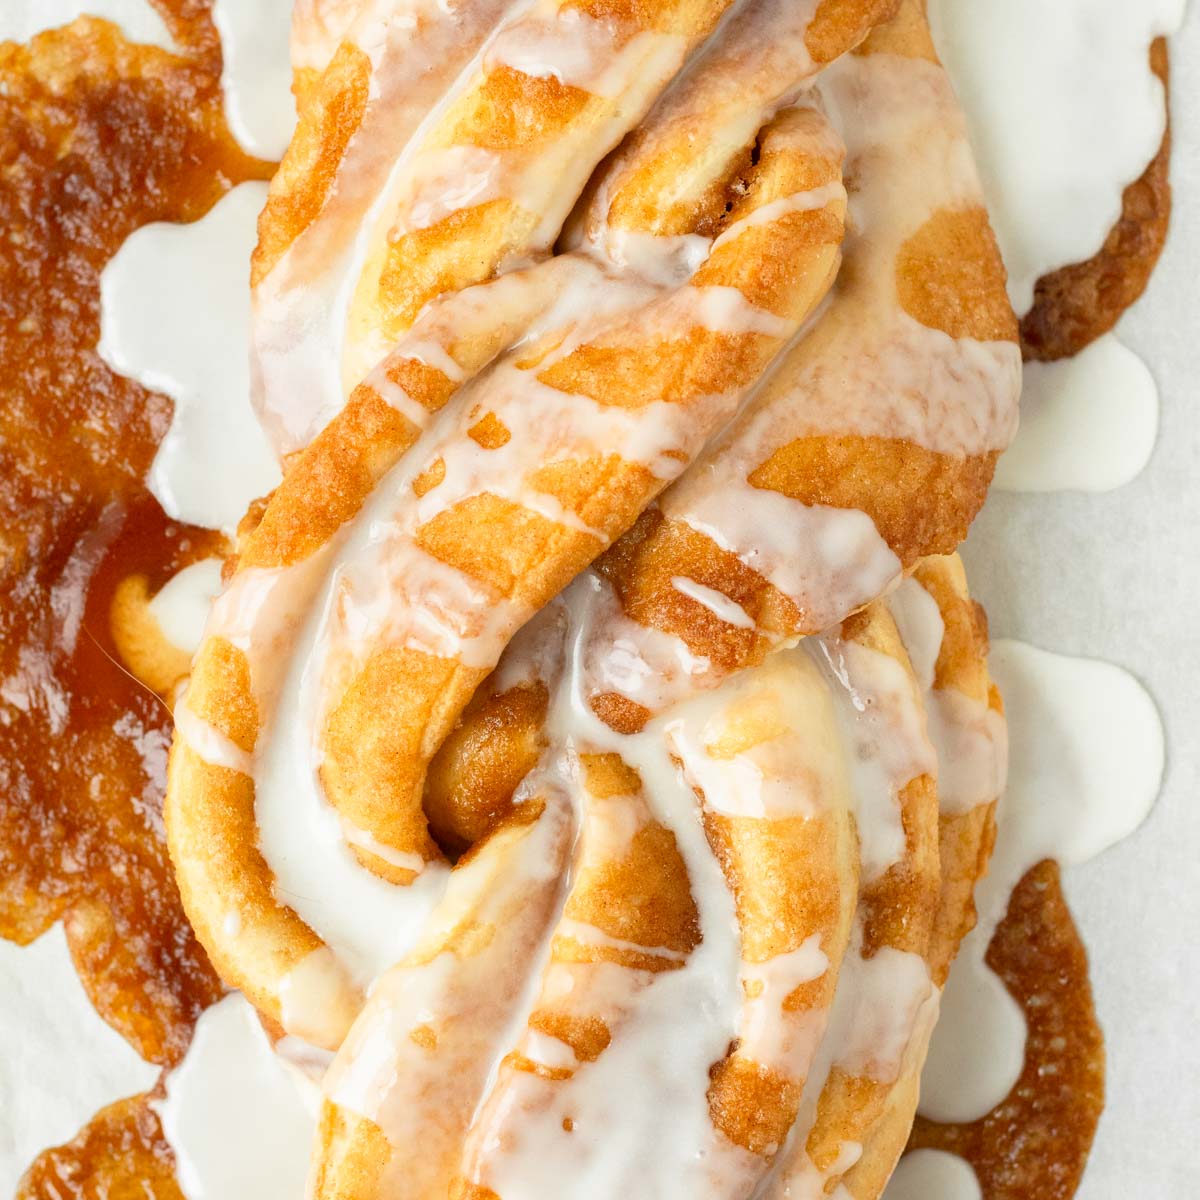 This cinnamon twist loaf is a quick and easy classic brunch recipe made with a quick-rising dough and classic cinnamon sugar filling for a delicious homemade breakfast. We love serving this recipe during the holidays and it is the perfect Christmas breakfast recipe.